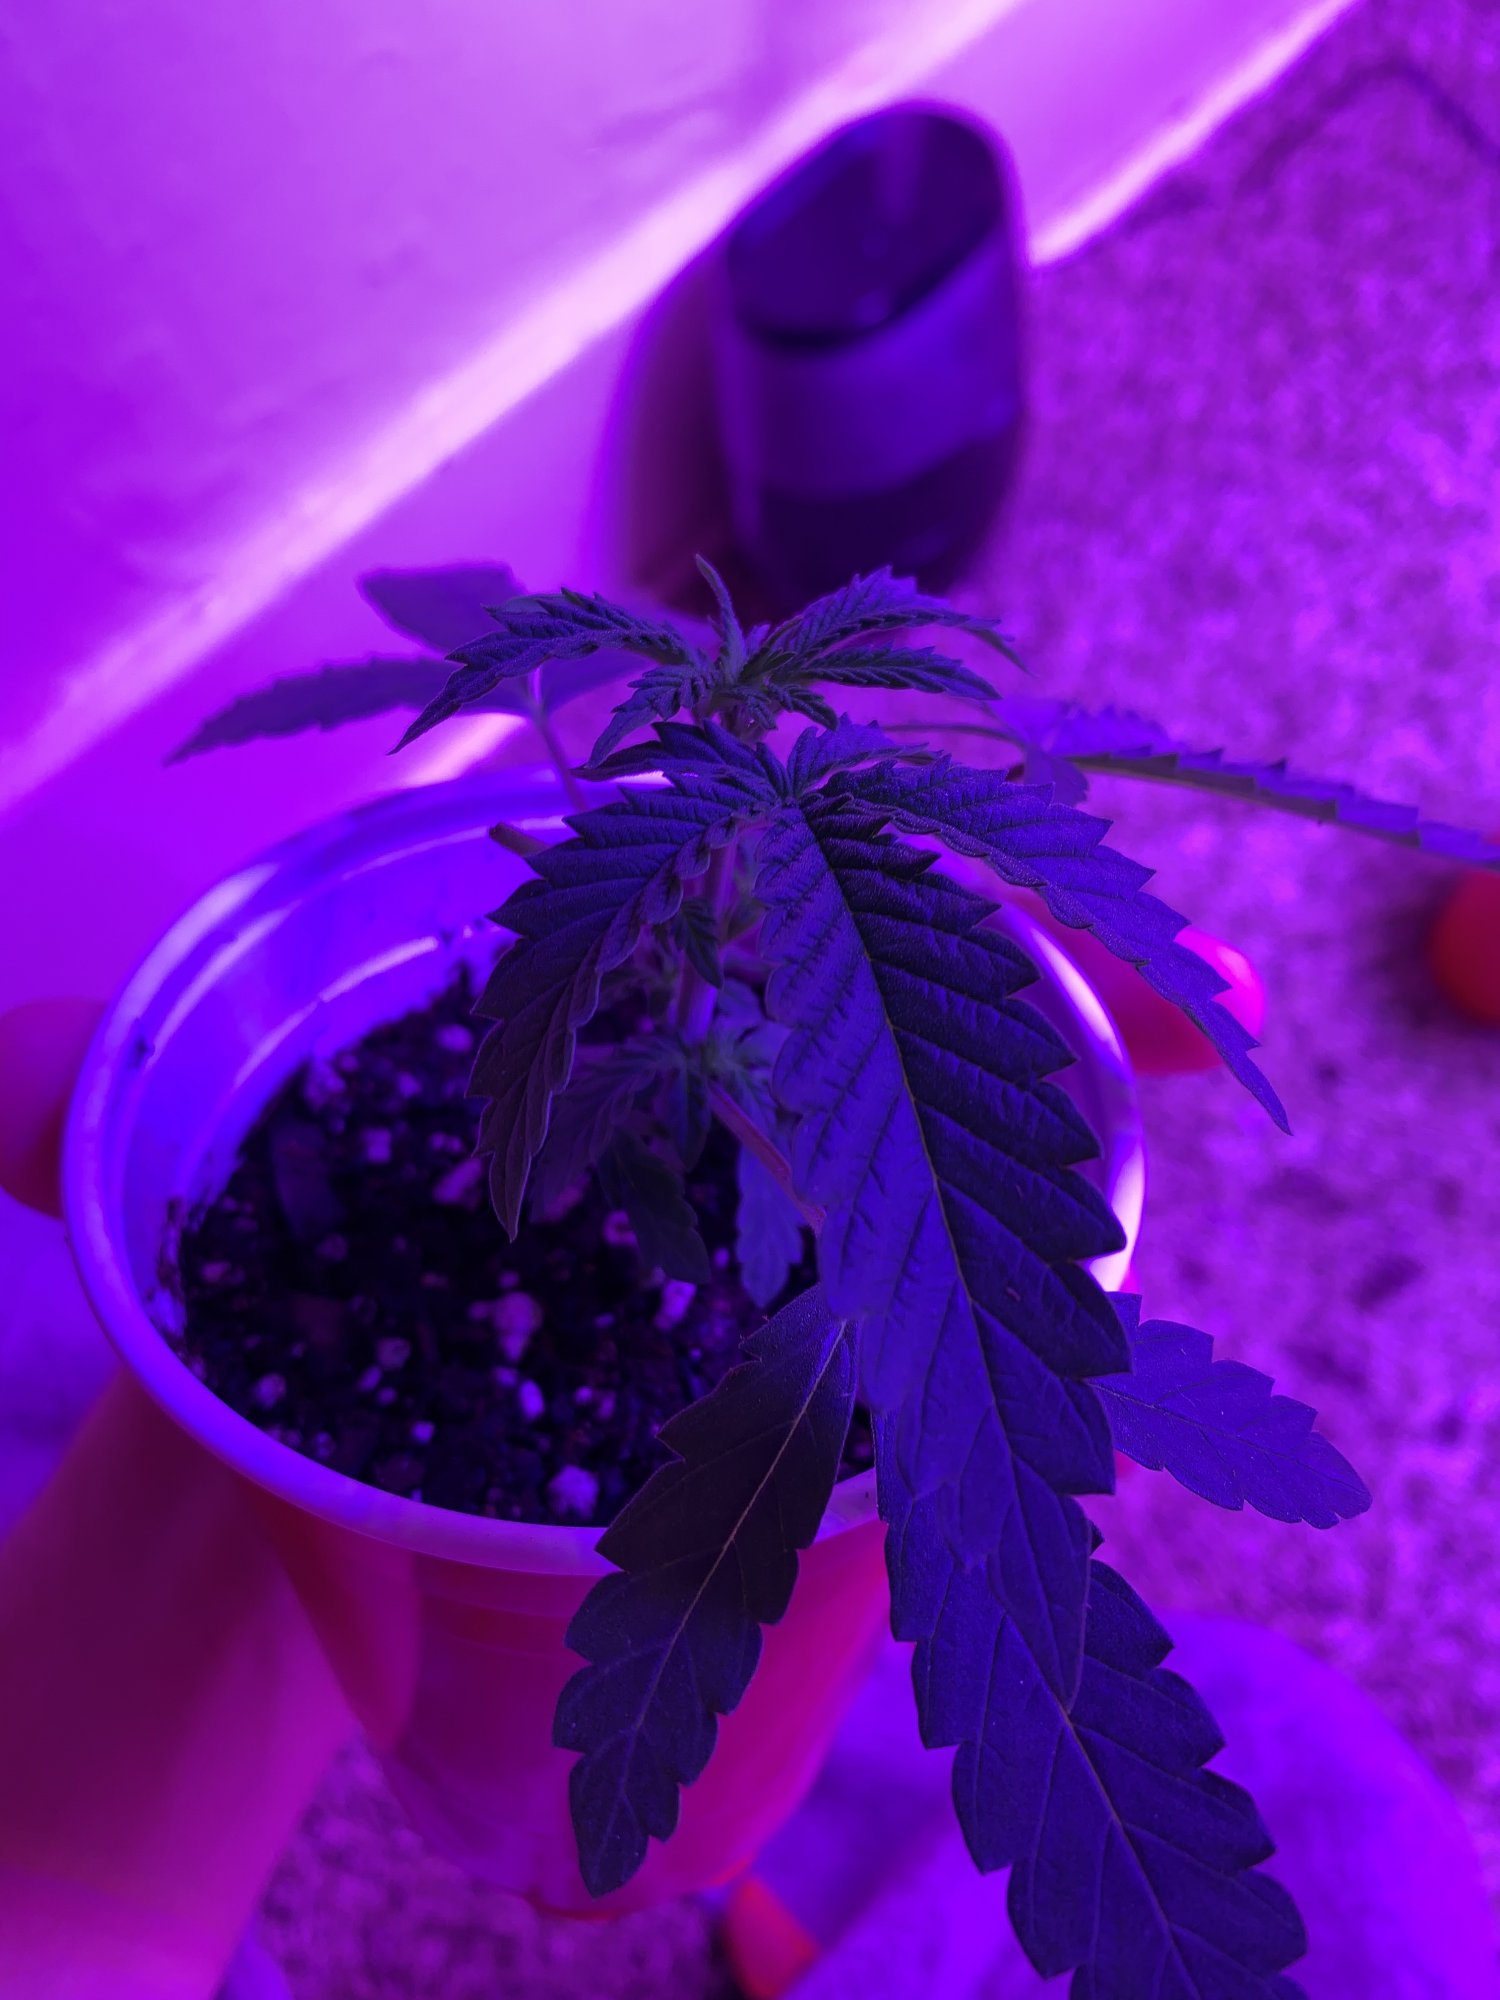 Need advice as soon as possible plants are in critical condition 4